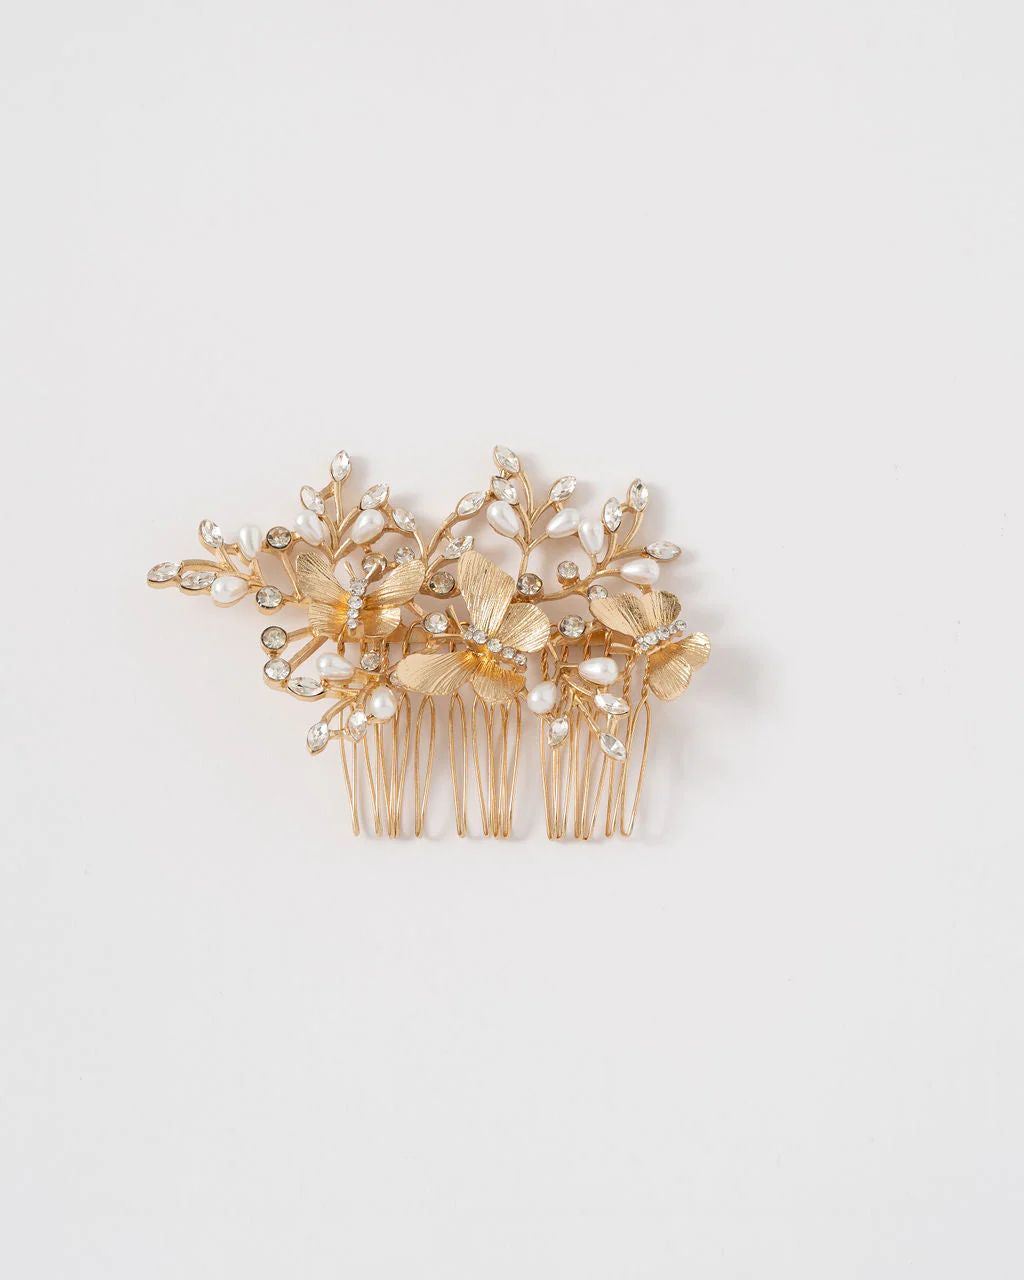 Elizabeth Butterfly Embellished Hair Comb Clip | VICI Collection